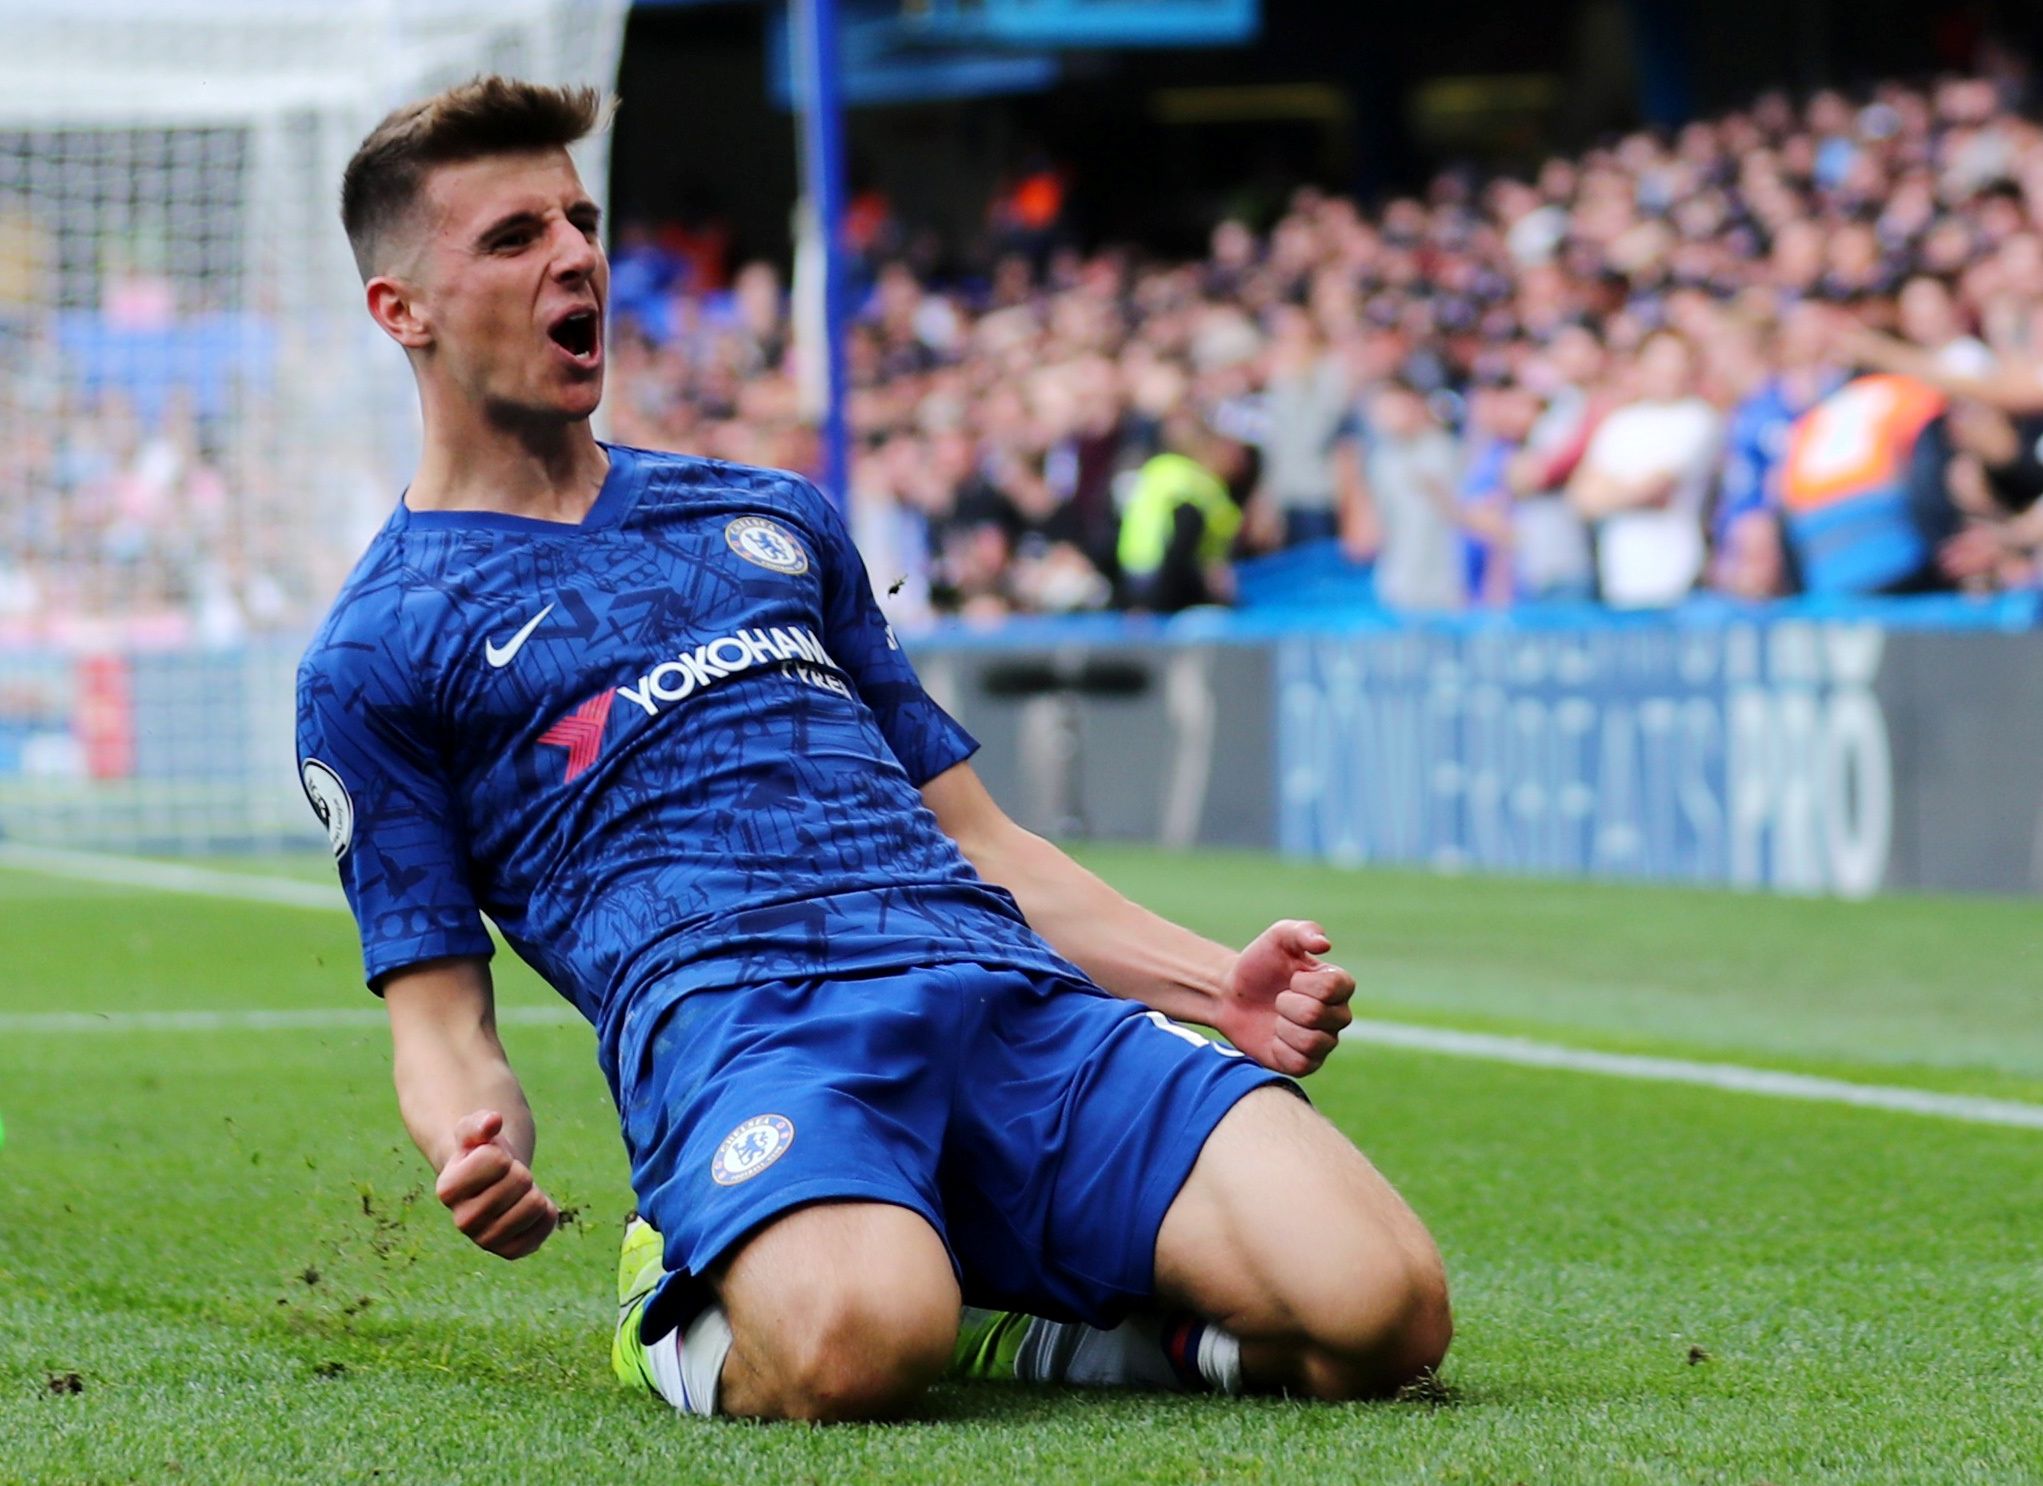 Soccer Football - Premier League - Chelsea v Leicester City - Stamford Bridge, London, Britain - August 18, 2019  Chelsea's Mason Mount celebrates scoring their first goal   REUTERS/Eddie Keogh  EDITORIAL USE ONLY. No use with unauthorized audio, video, data, fixture lists, club/league logos or 